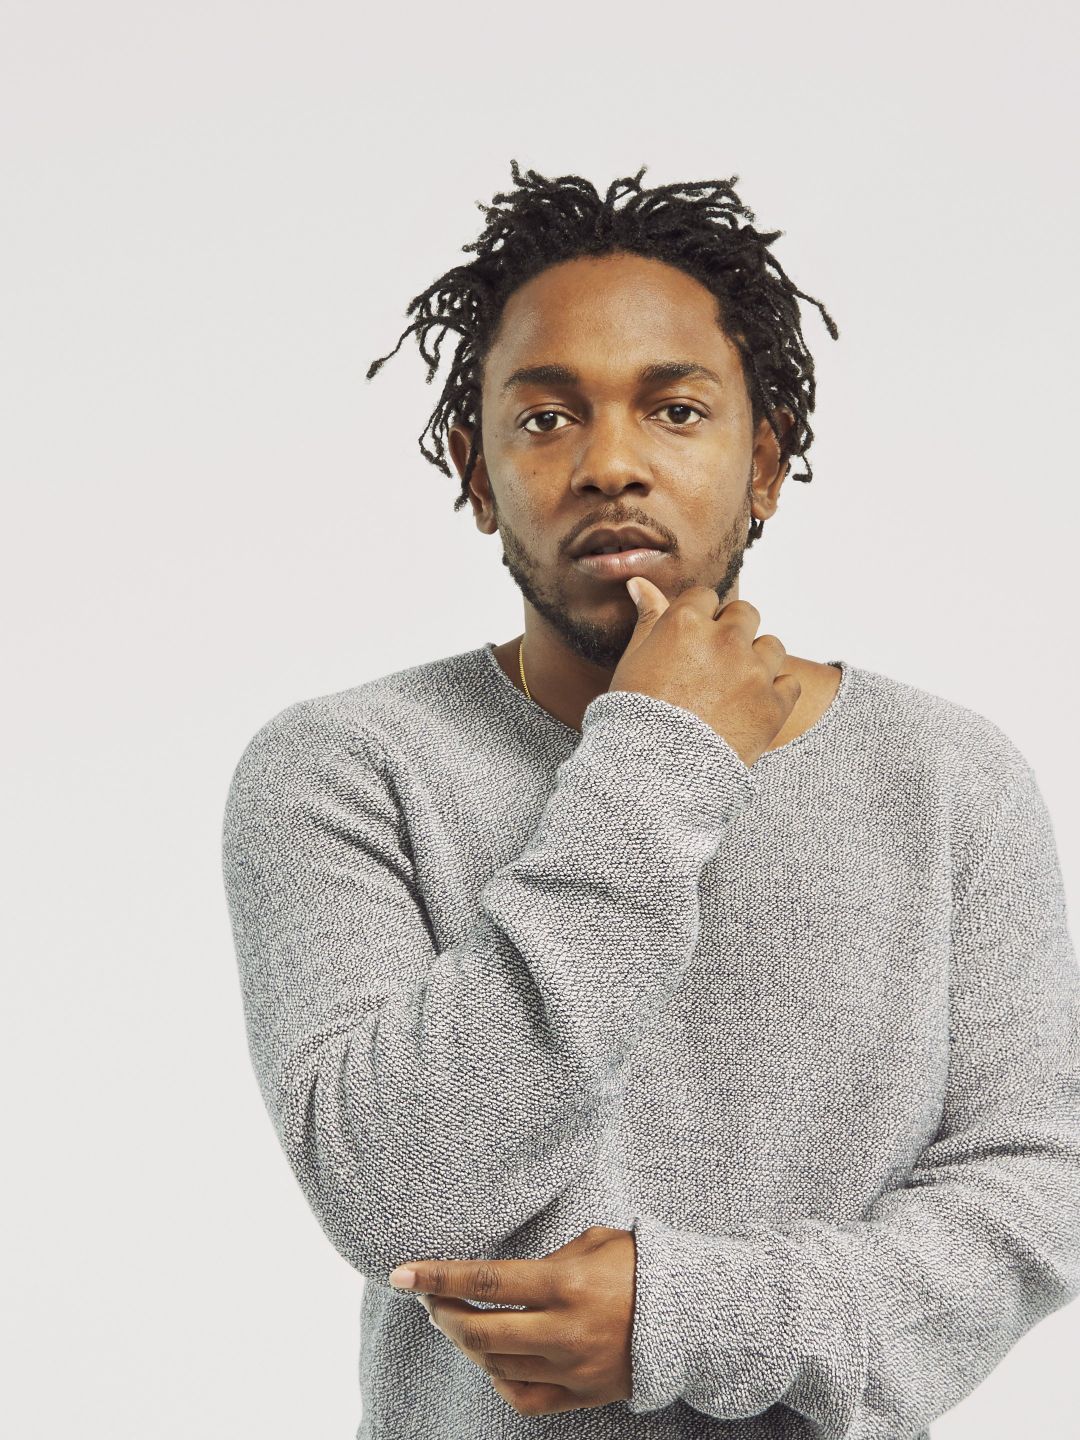 Kendrick Lamar who is his mother